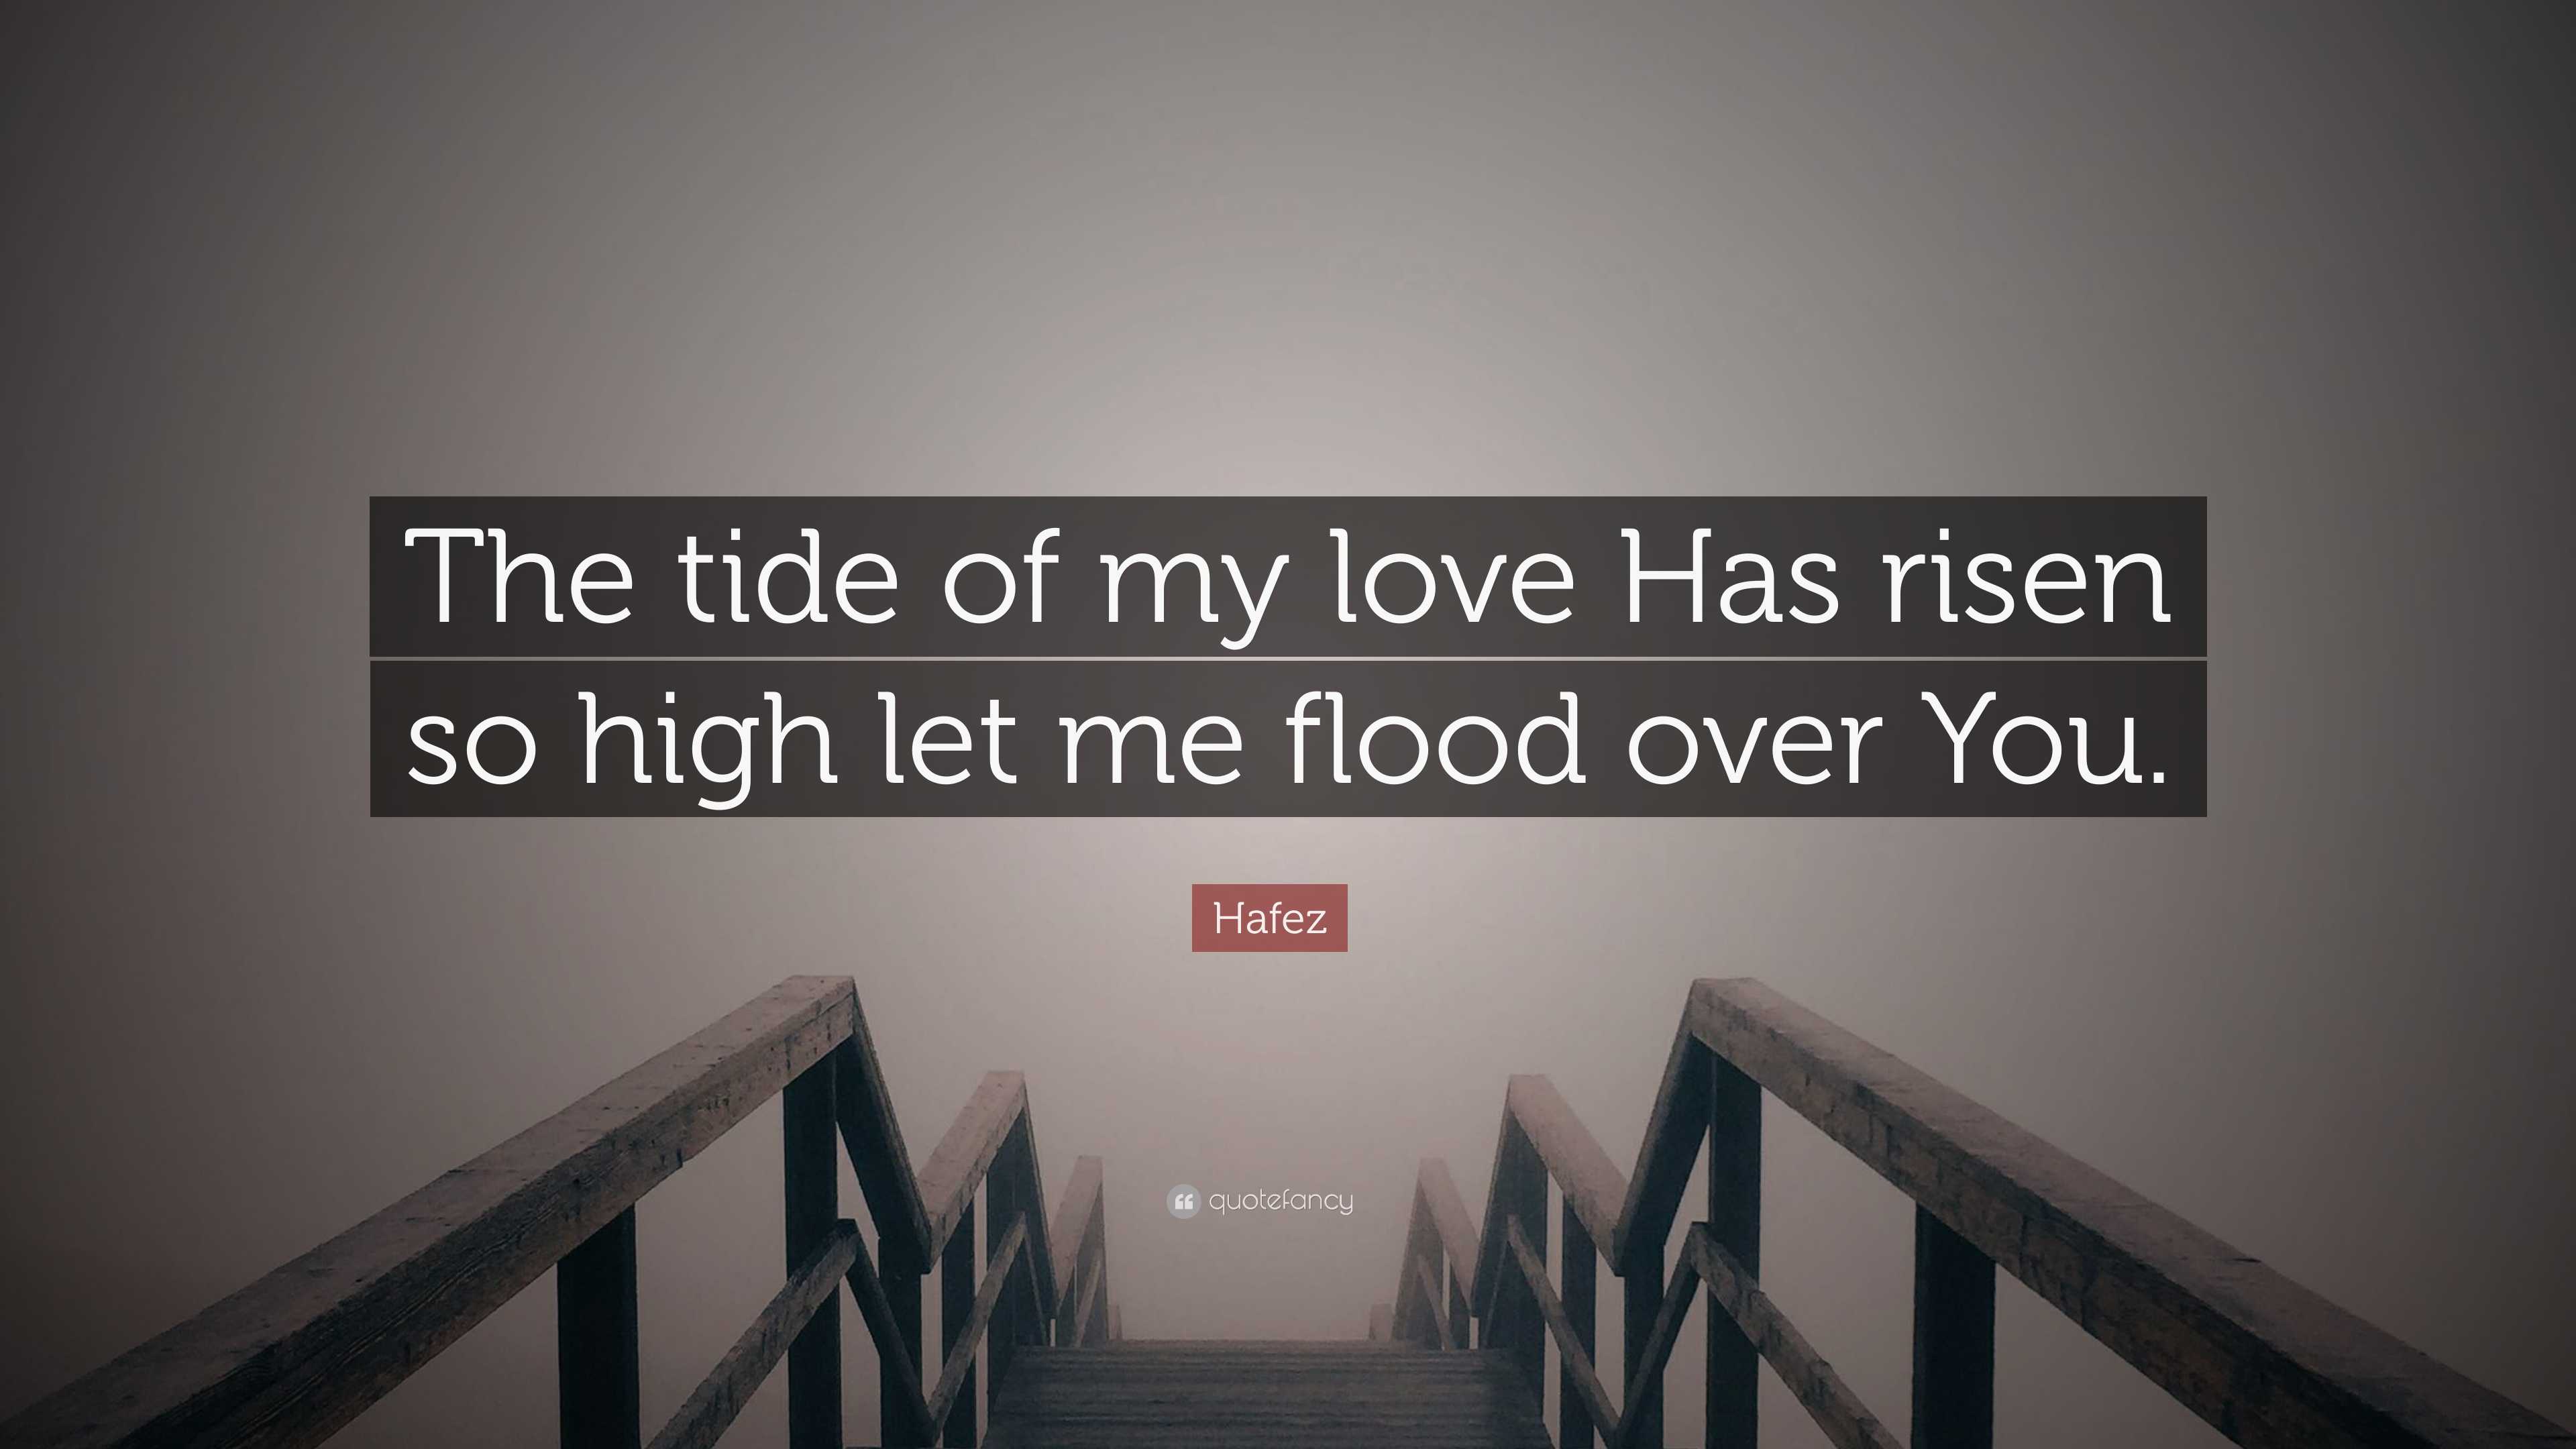 Your love is high like the tide - cover . . . #fyp #cover #foryoupage